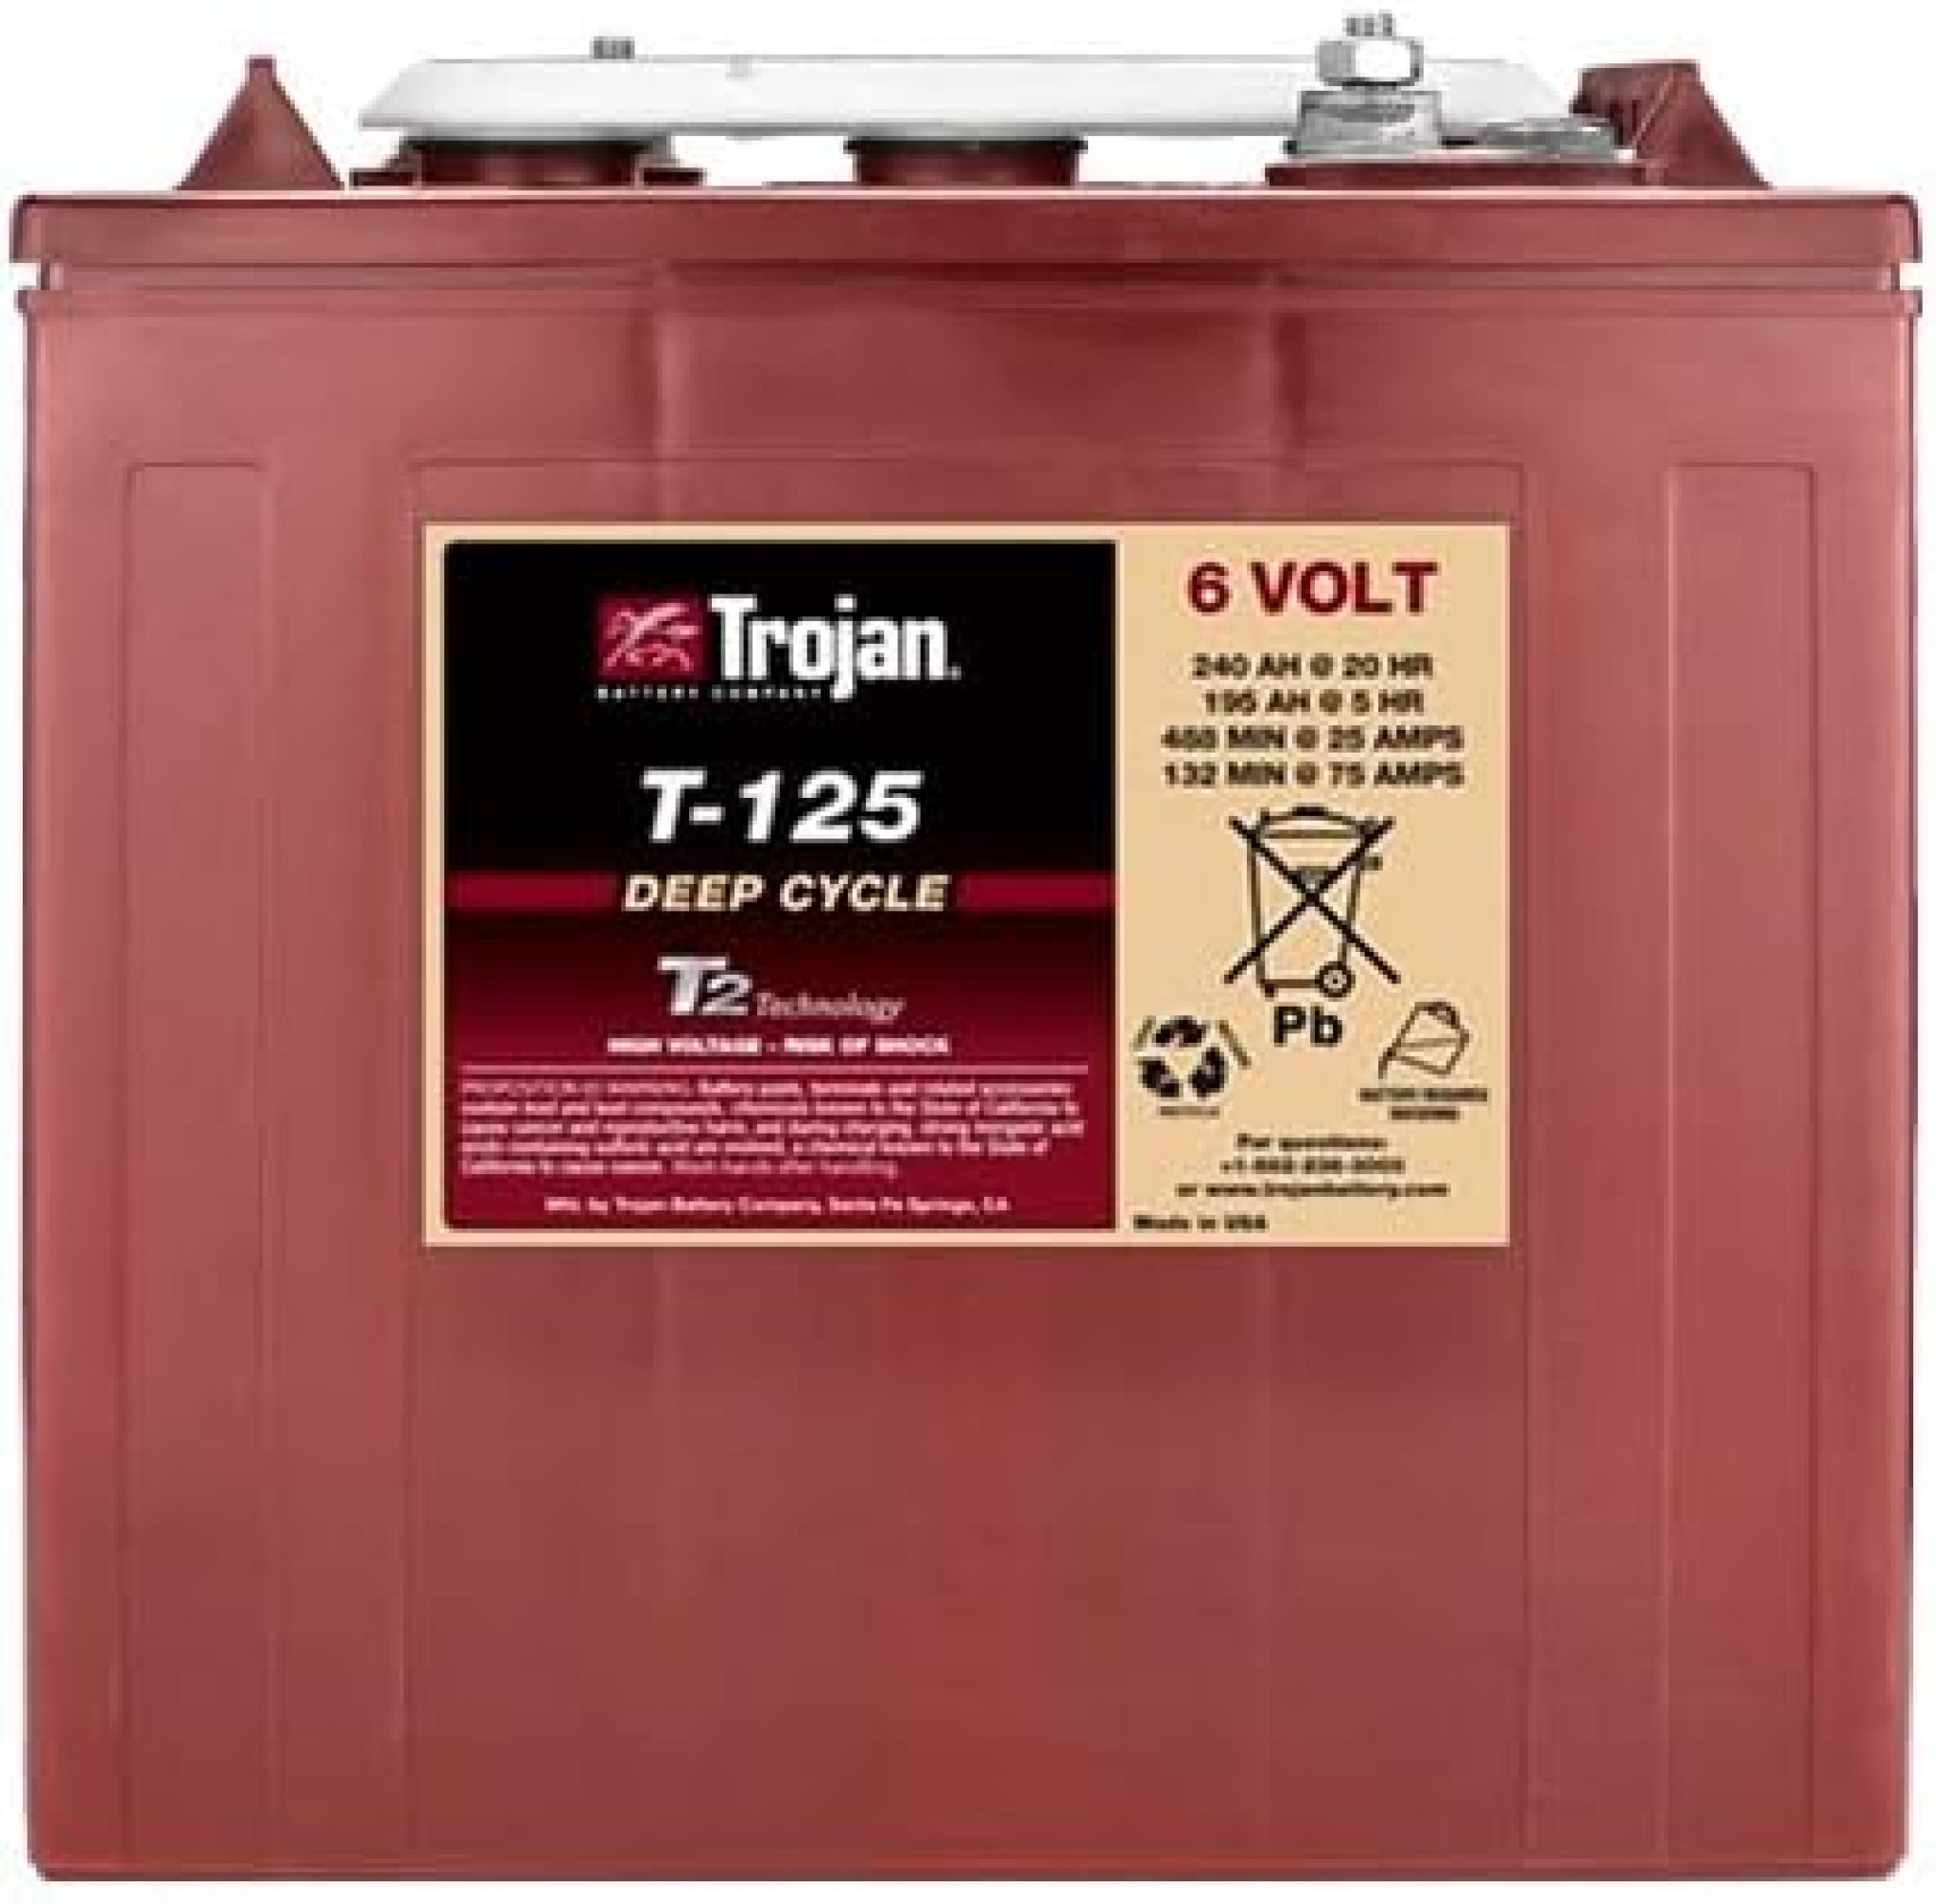 Best 6 Volt Rv Batteries For Boondockers And Dry Campers